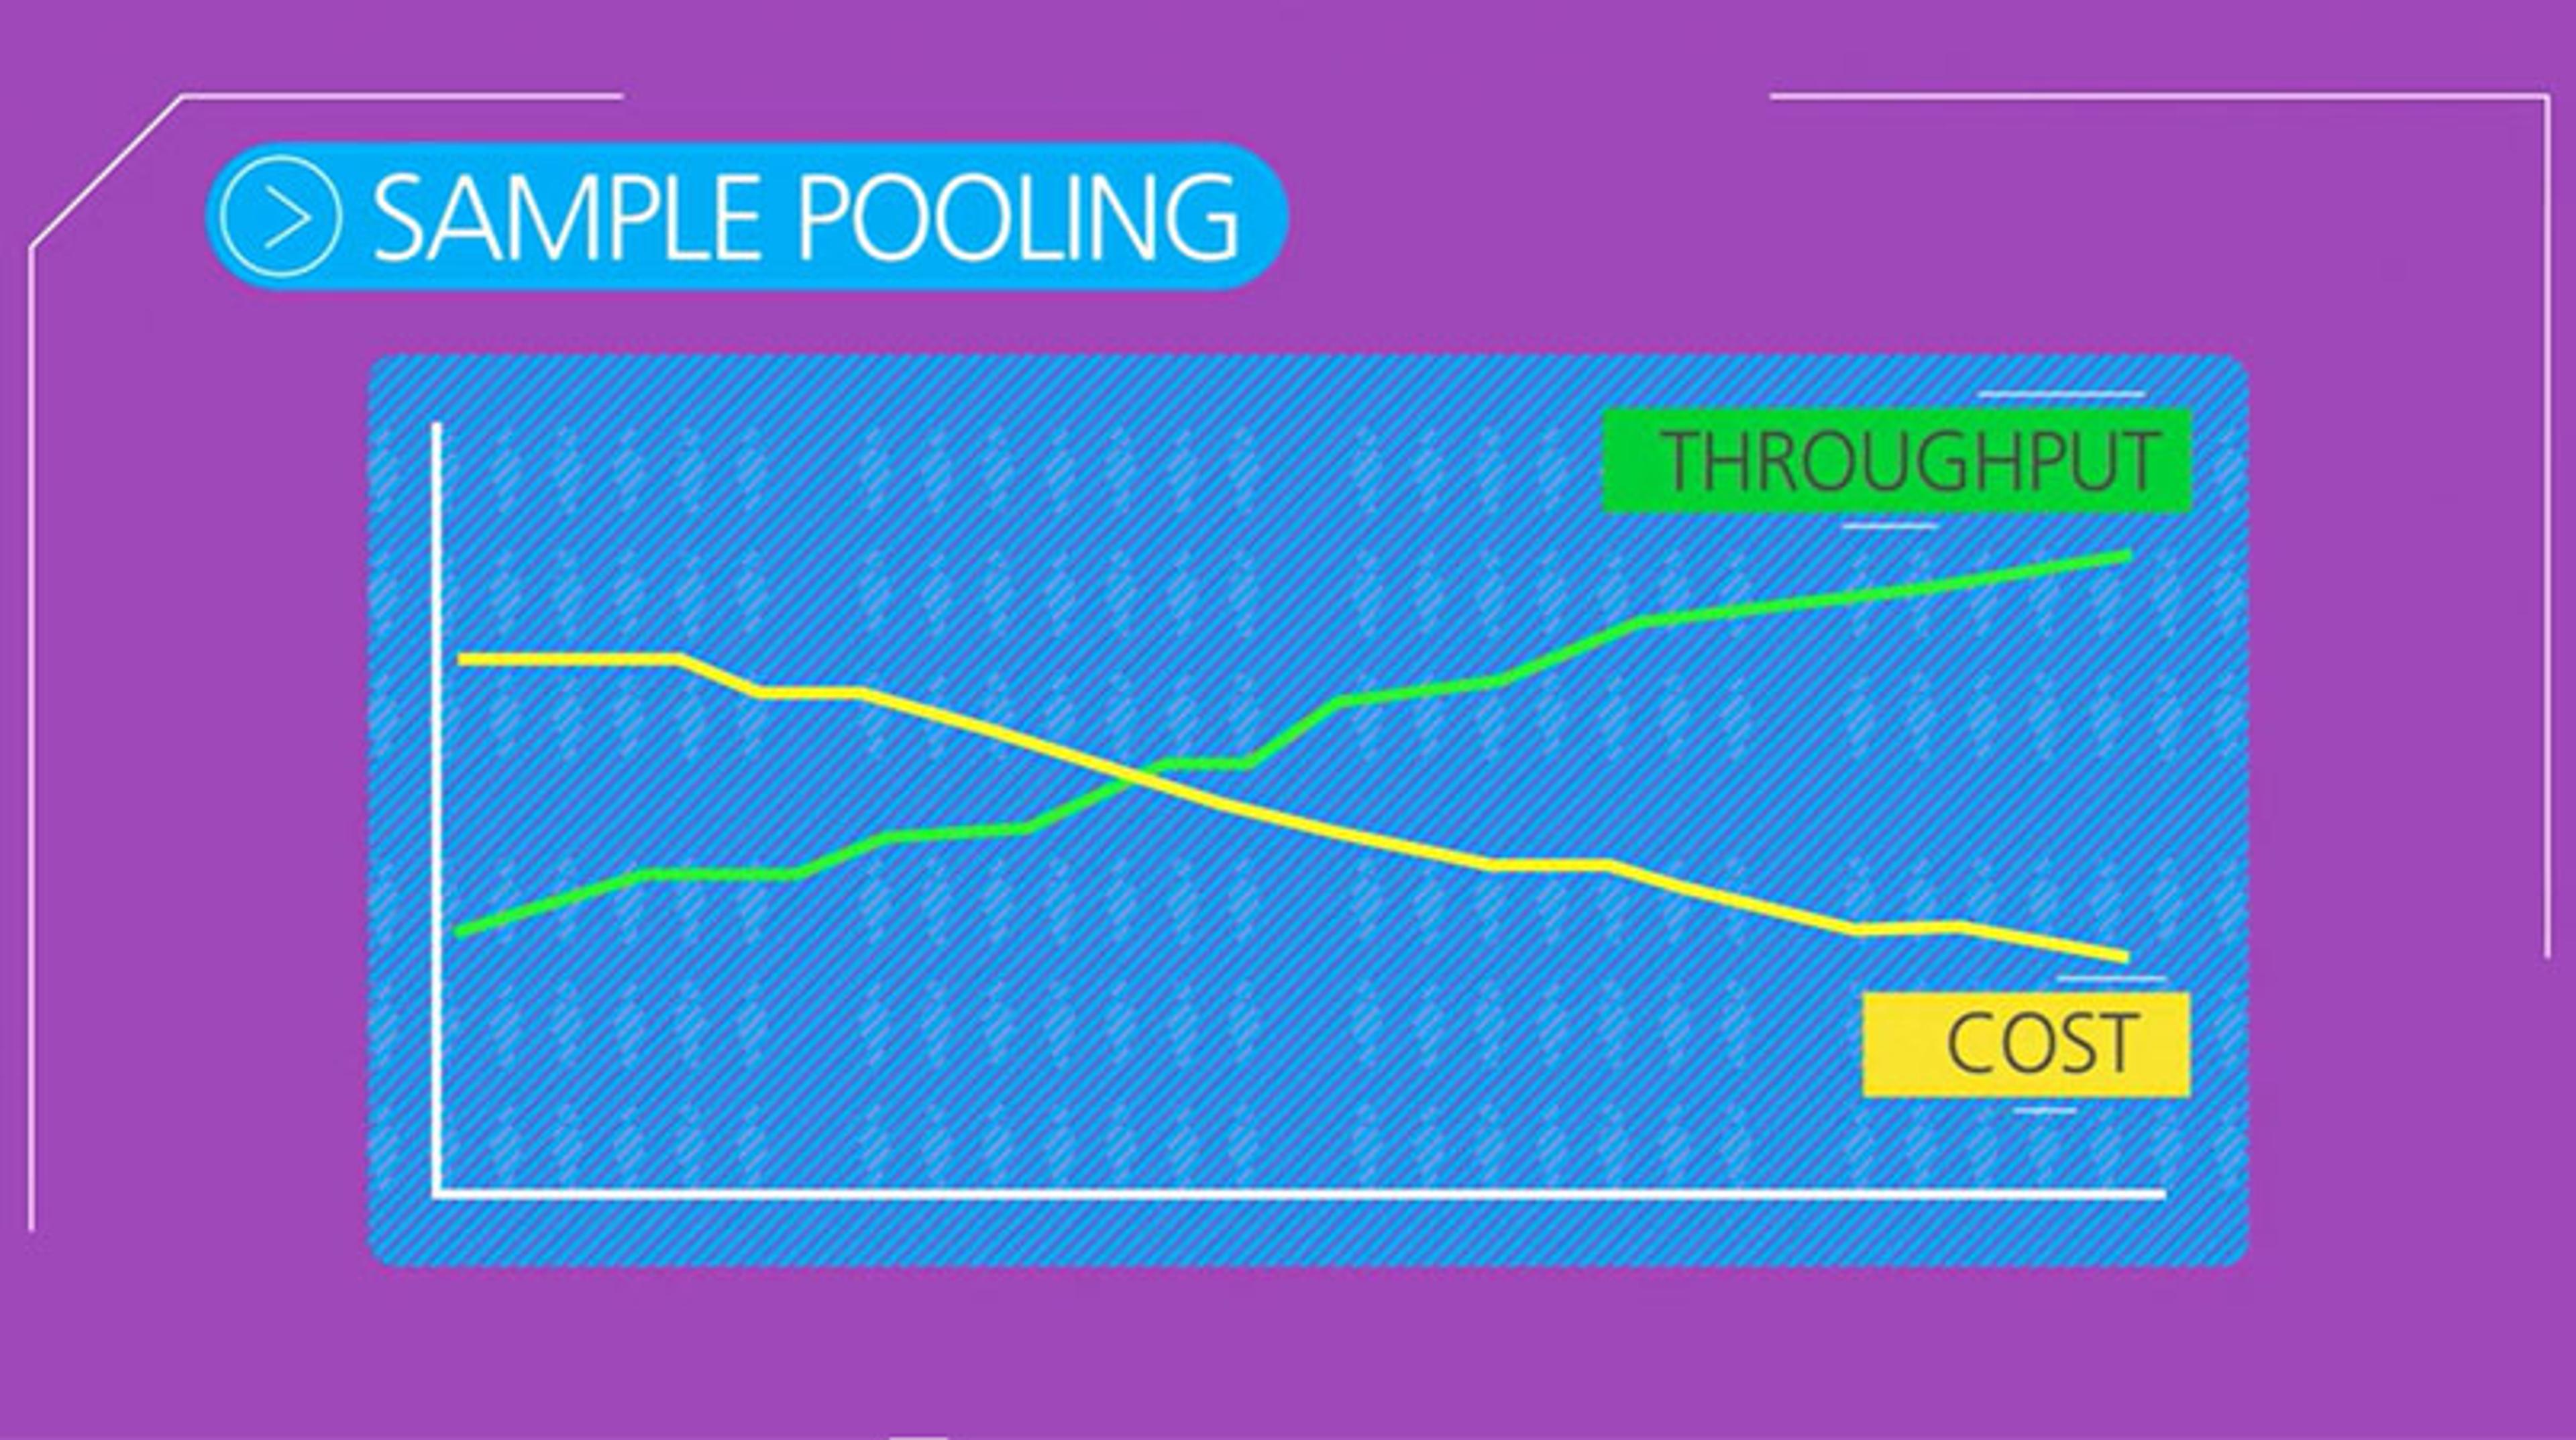 Sample pooling for accurate and sensitive COVID-19 testing